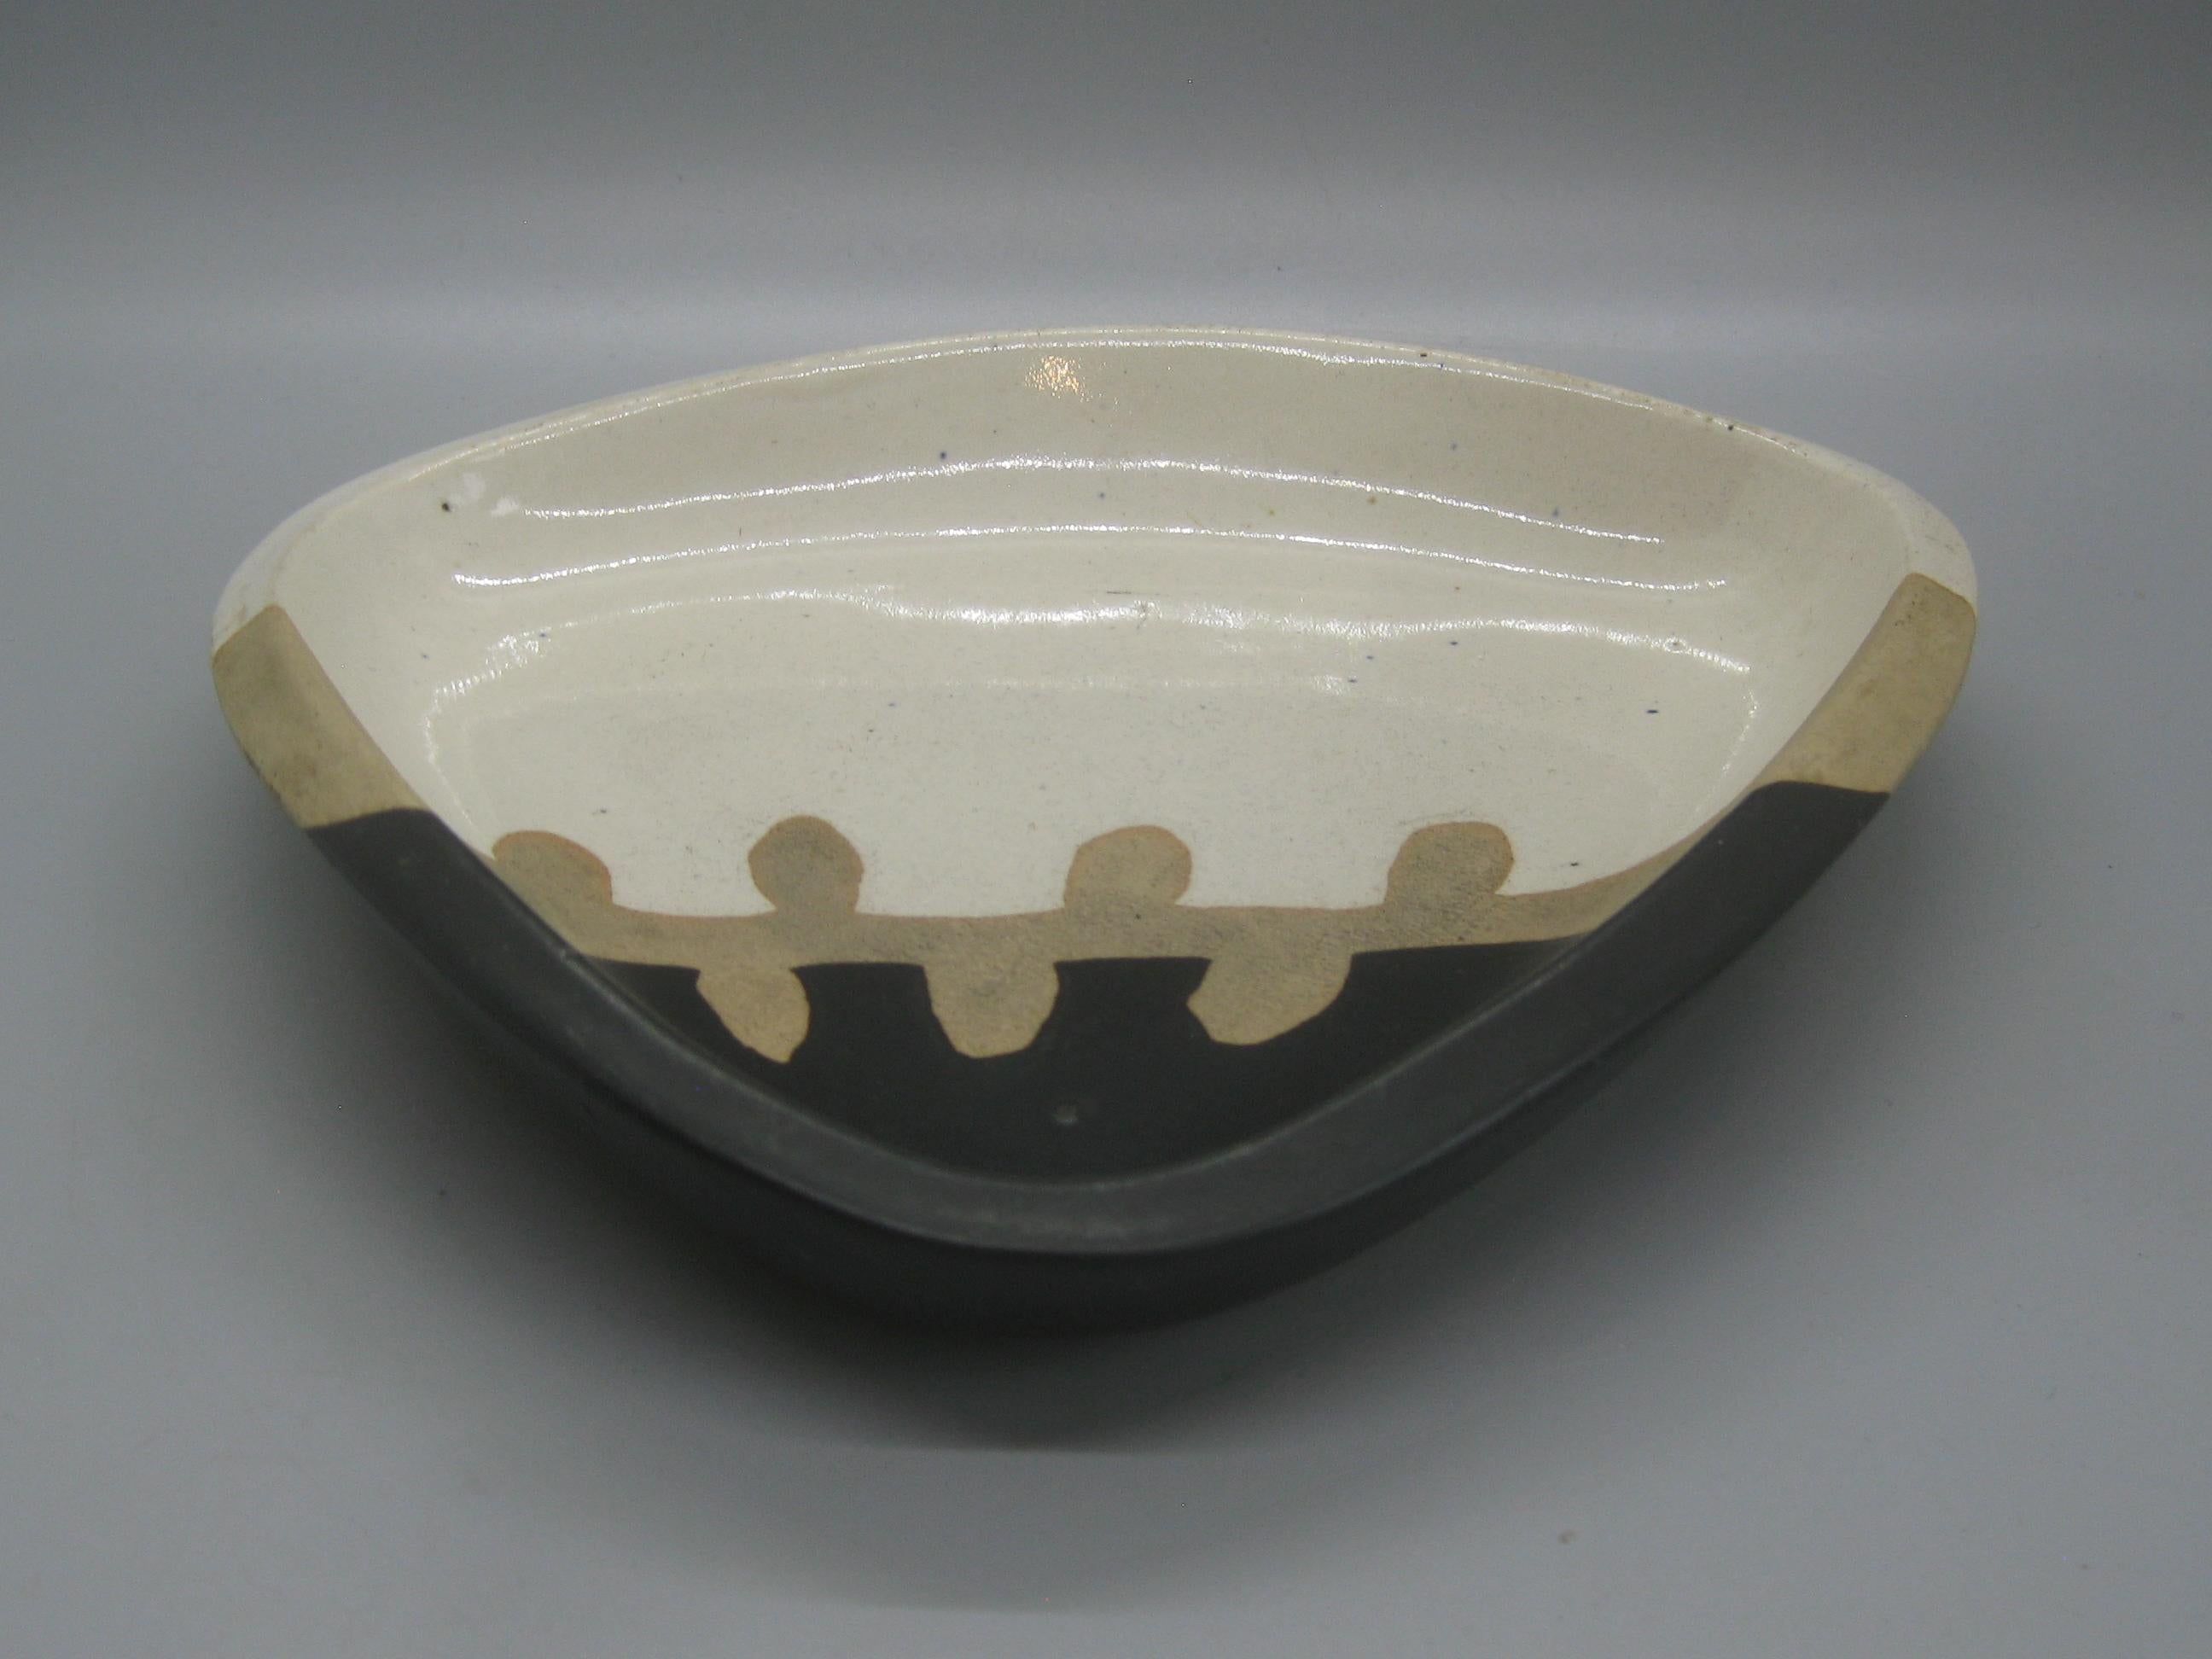 1960s Walter Dexter Studio Pottery Modernist Abstract Bowl Ceramic Arts Calgary In Good Condition For Sale In San Diego, CA